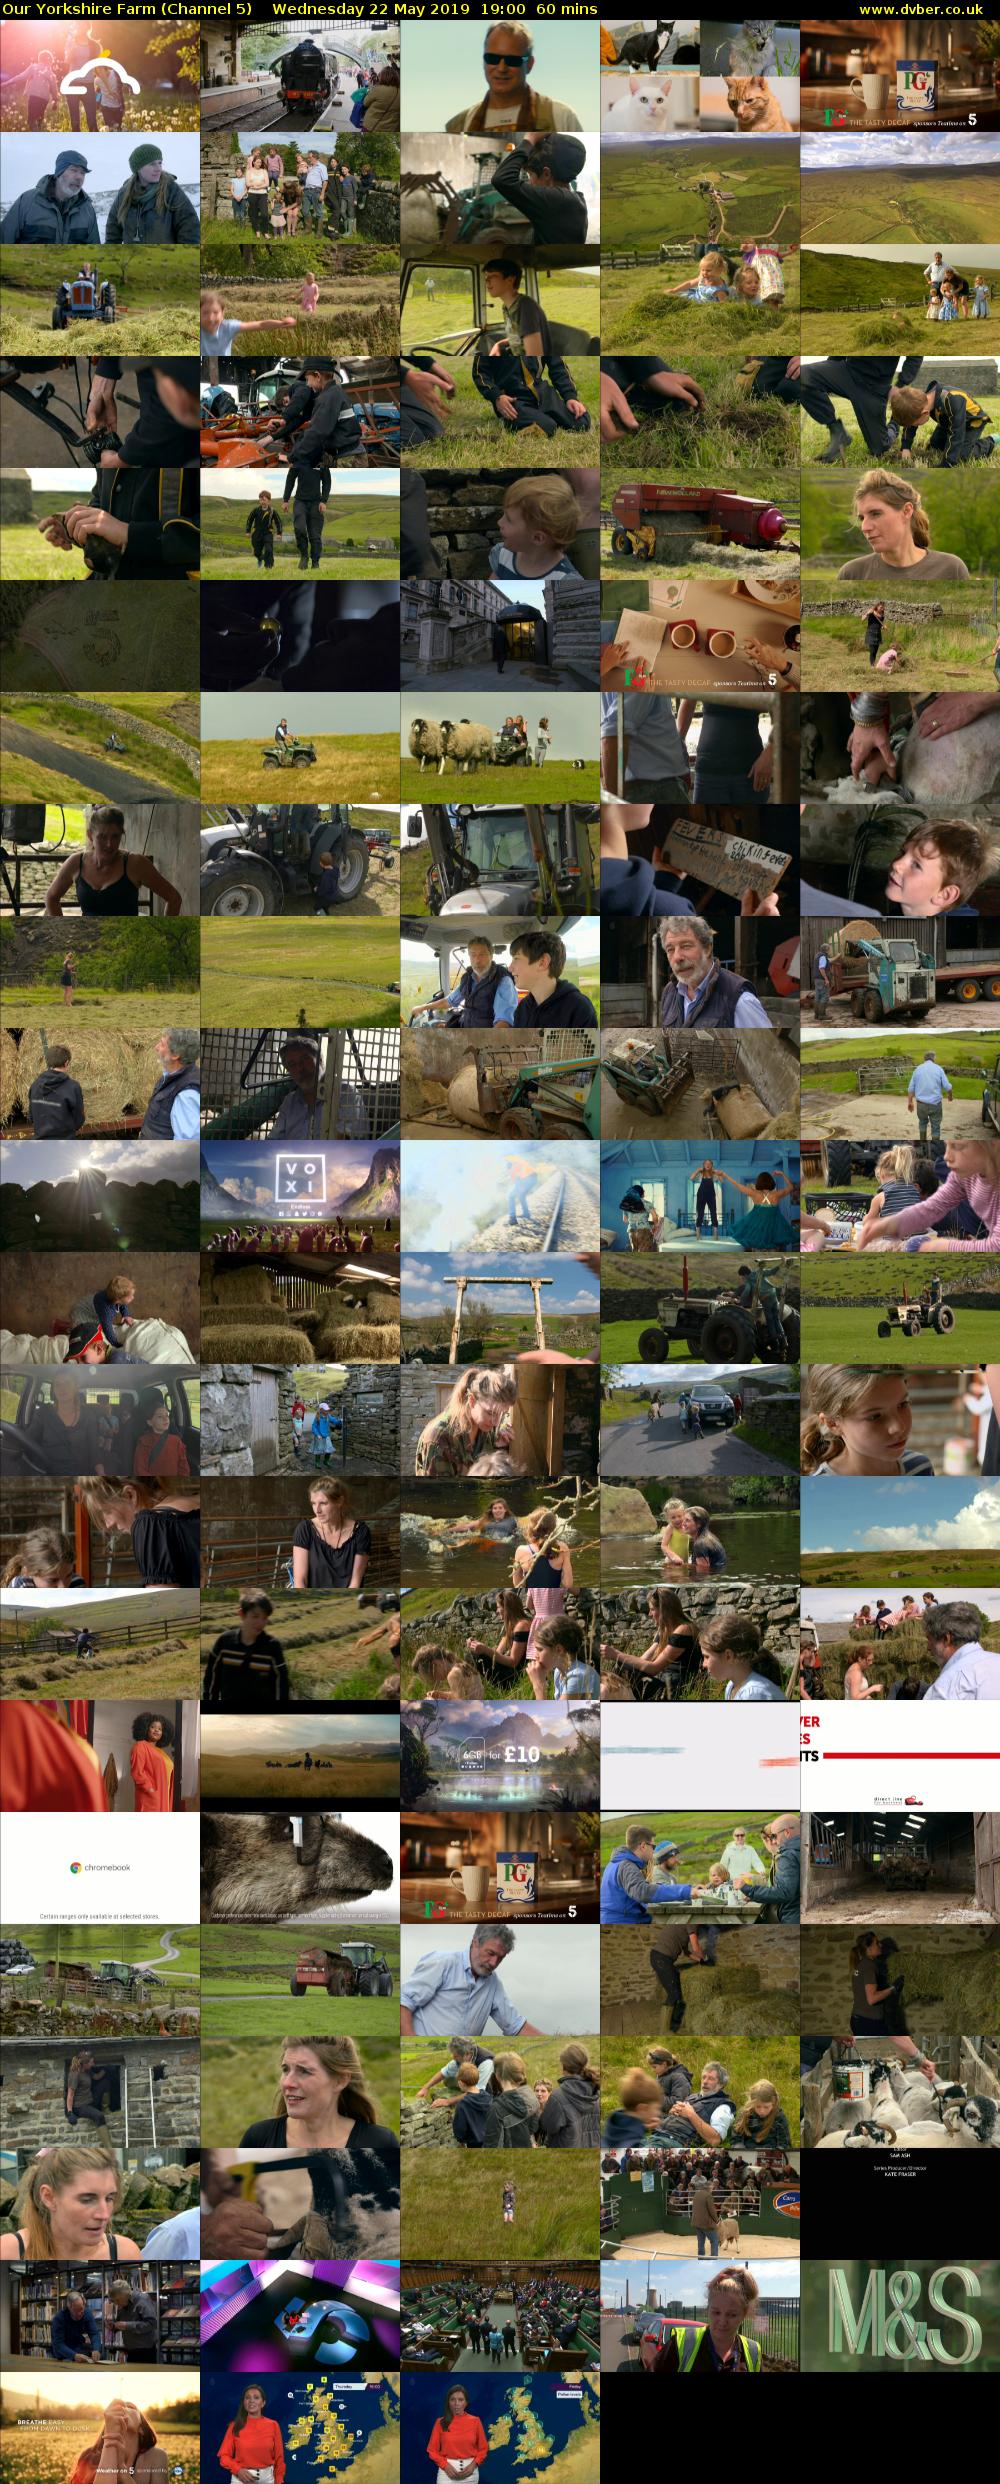 Our Yorkshire Farm (Channel 5) Wednesday 22 May 2019 19:00 - 20:00